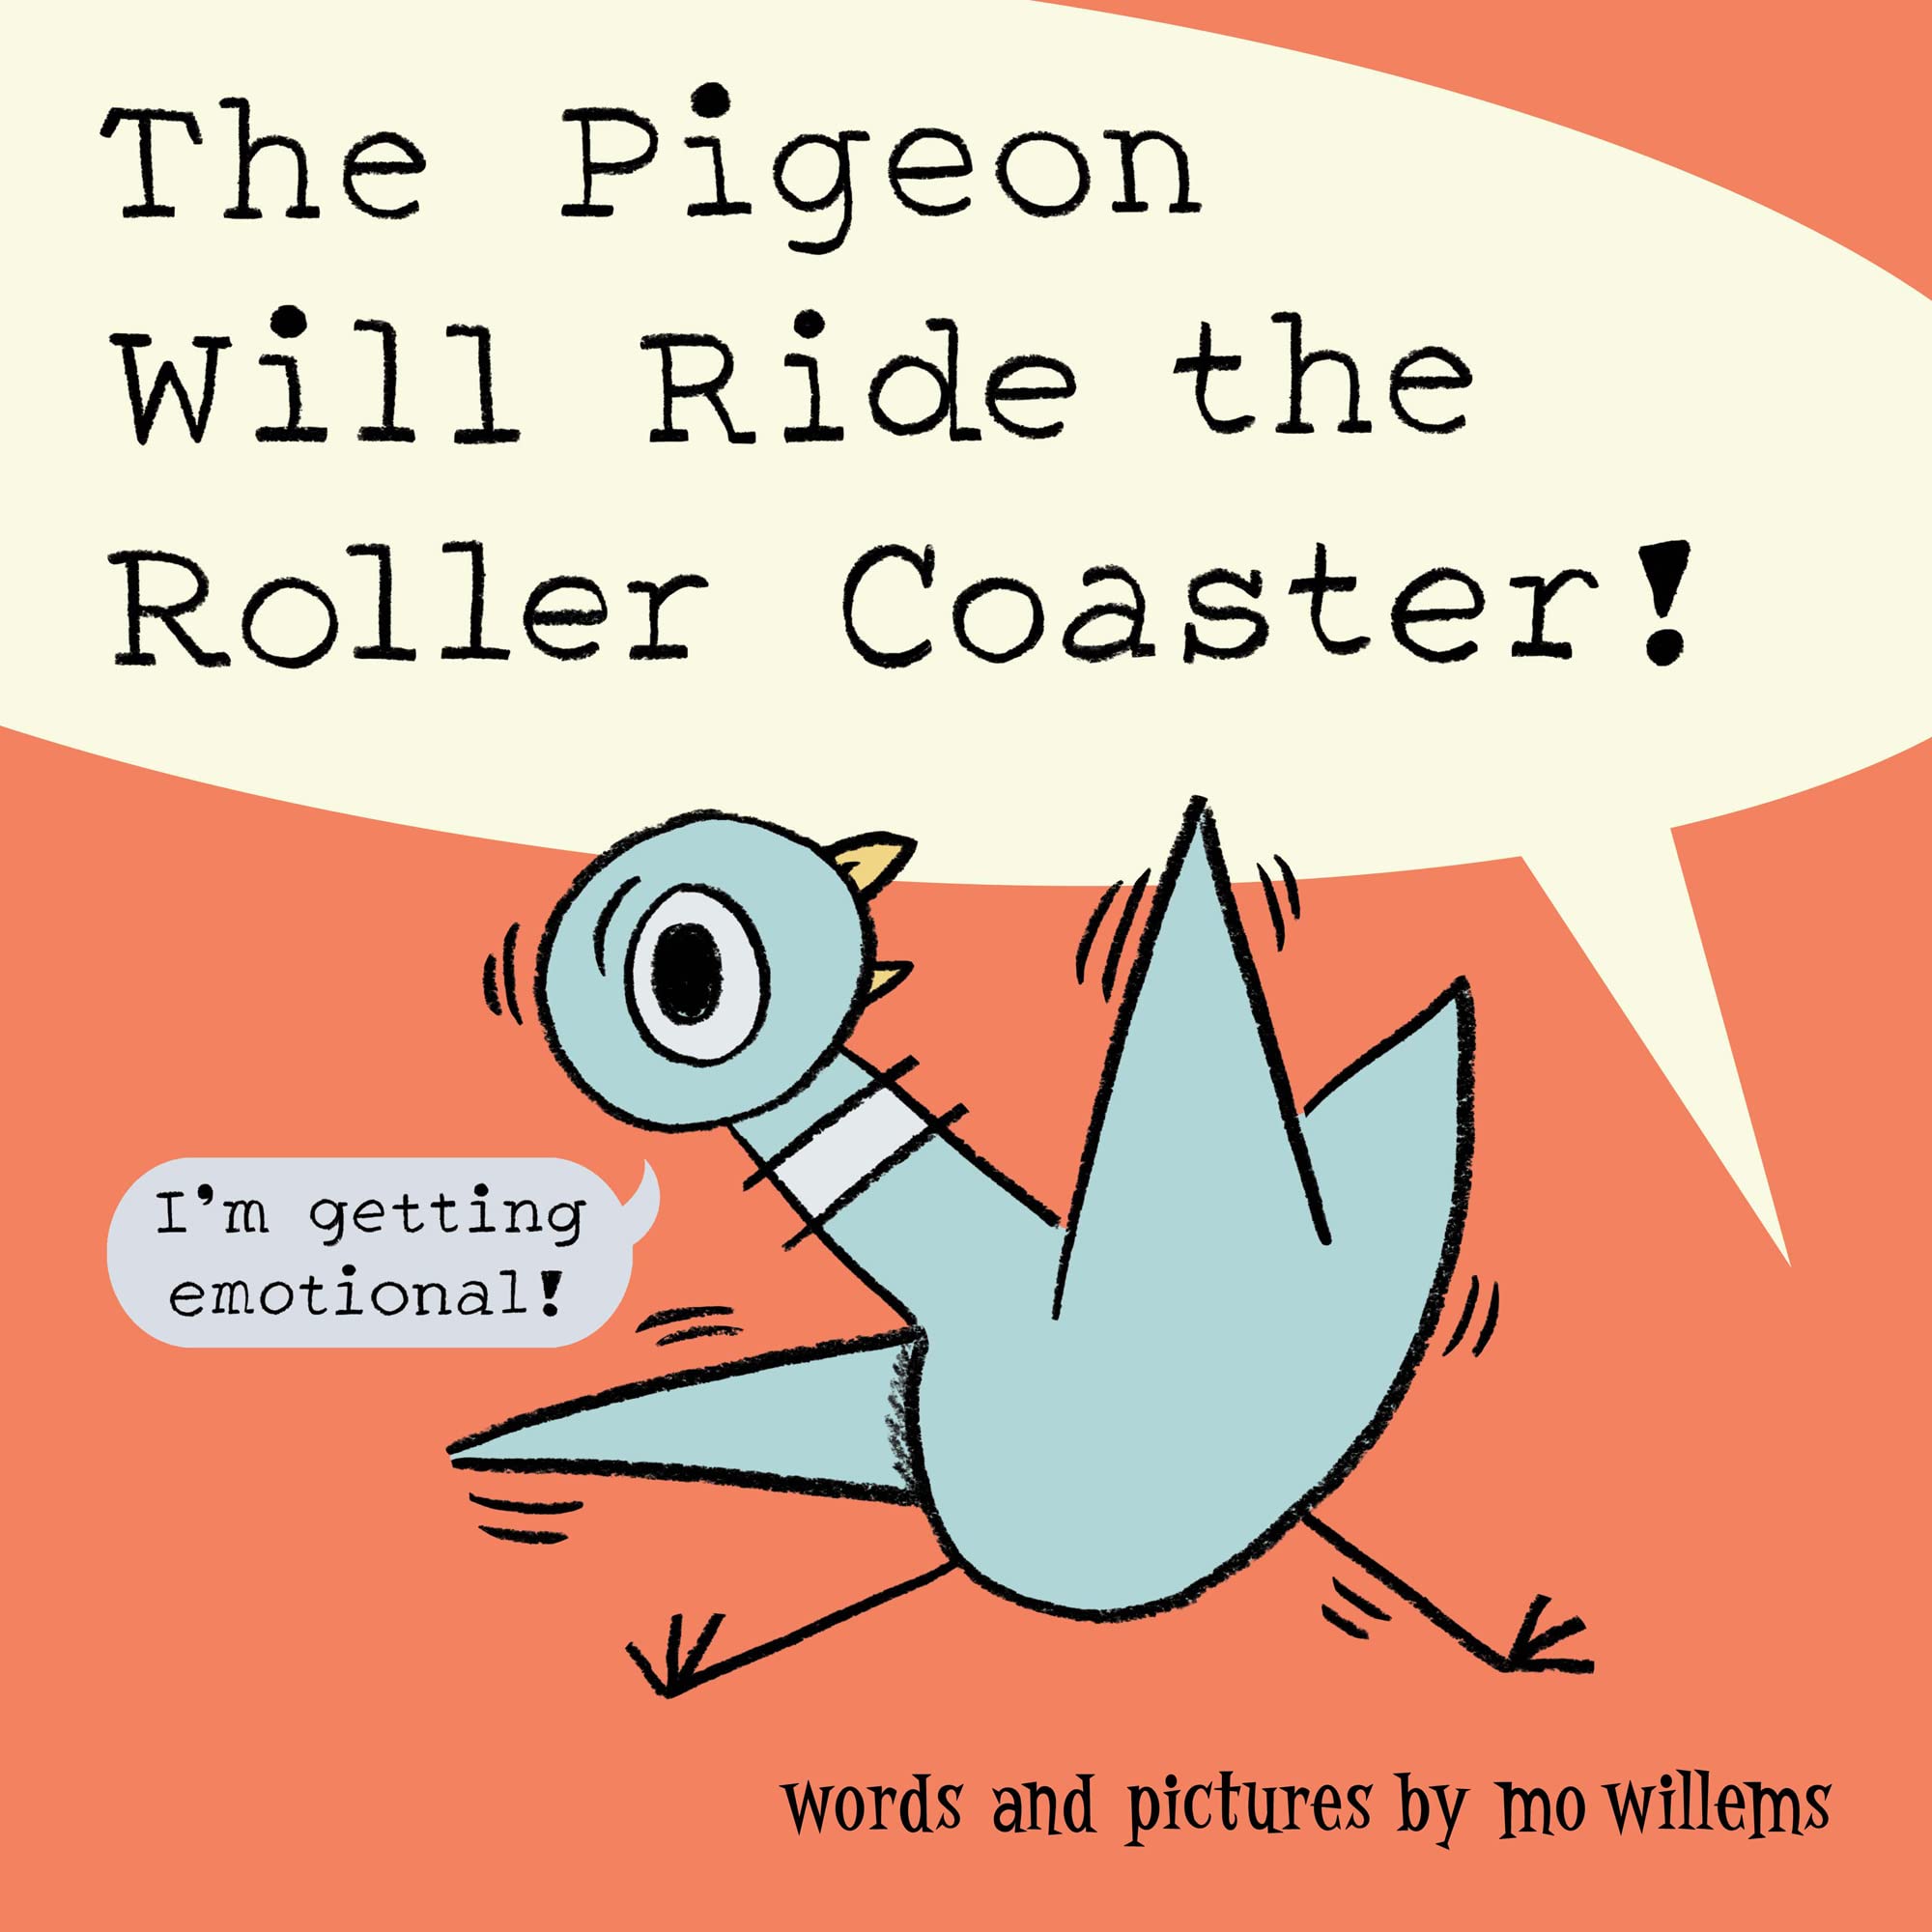 This Pigeon Will Ride the Roller Coaster